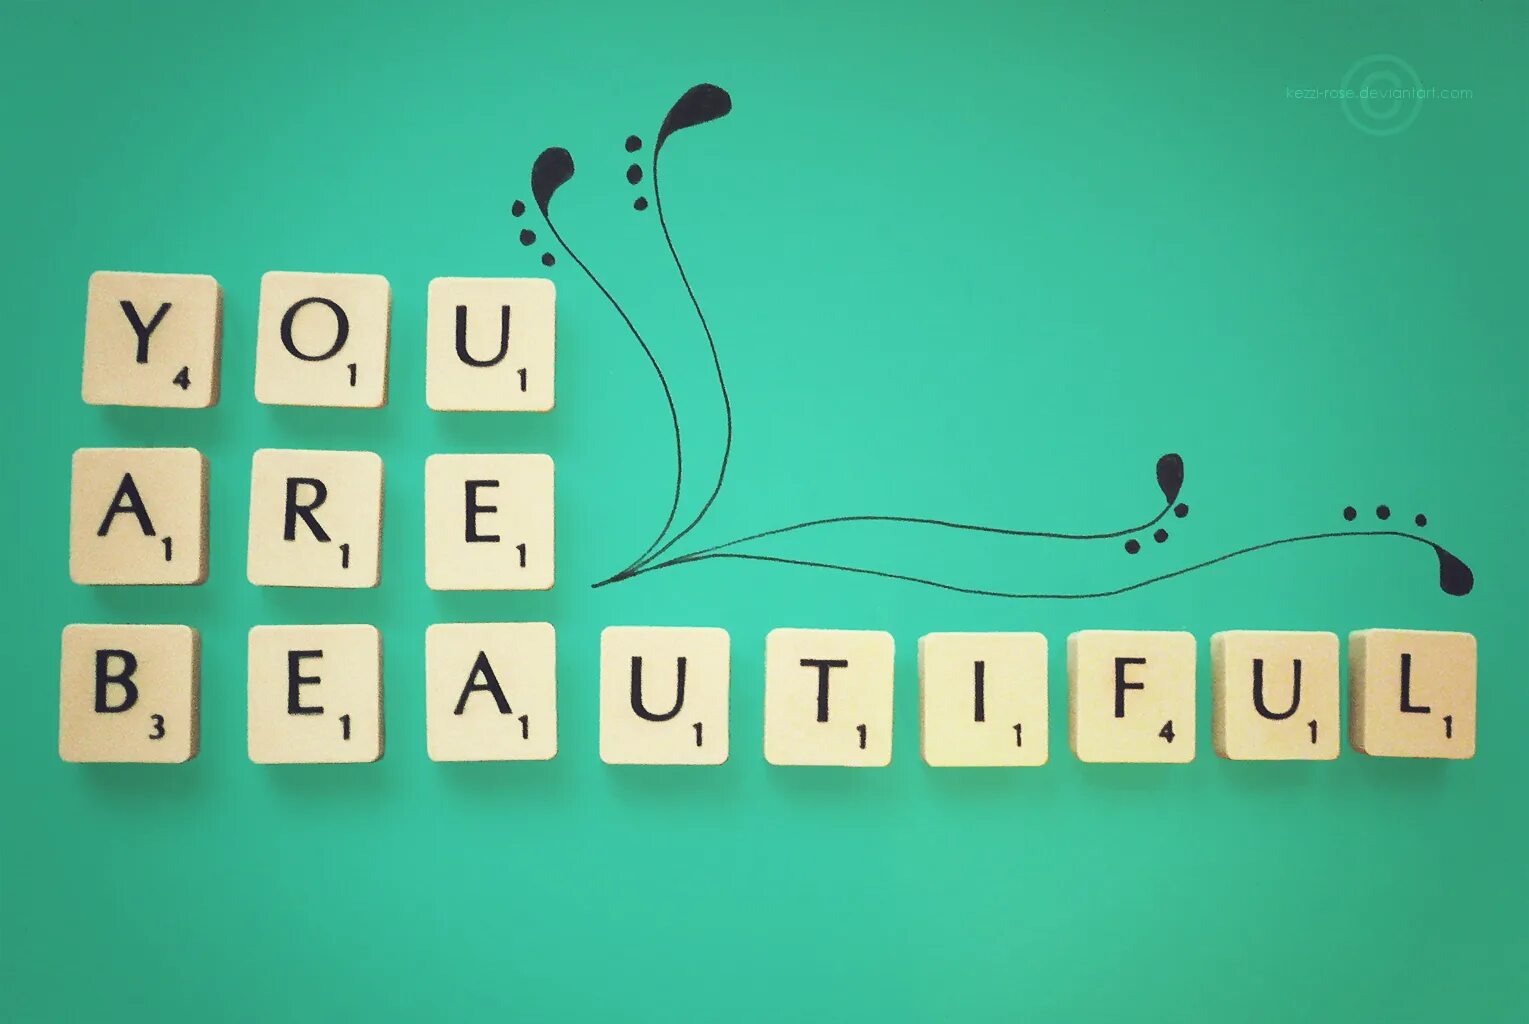 You are. You are picture. You are beautiful. You are beautiful picture. You are beautiful thing